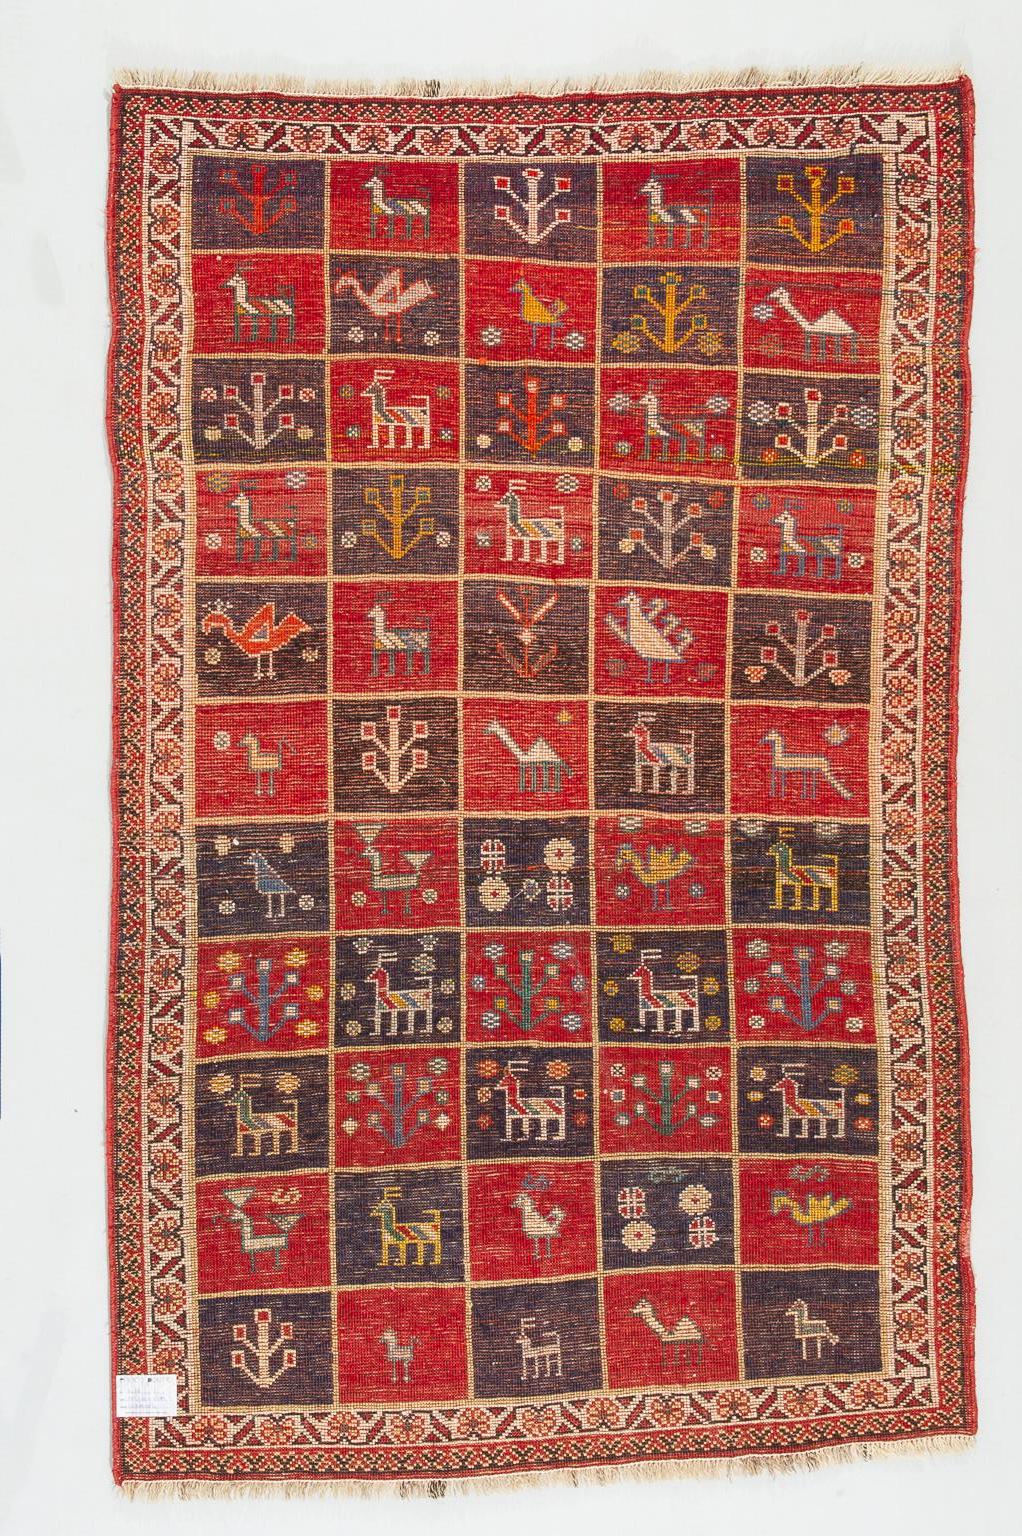 A typical nomadic product: a carpet full of colors and small drawings like those of children, but perfect and tidy, certainly the work of a good weaver.
It is a sturdy carpet, perfect for entrance: to be admired upon entering, as it has only one